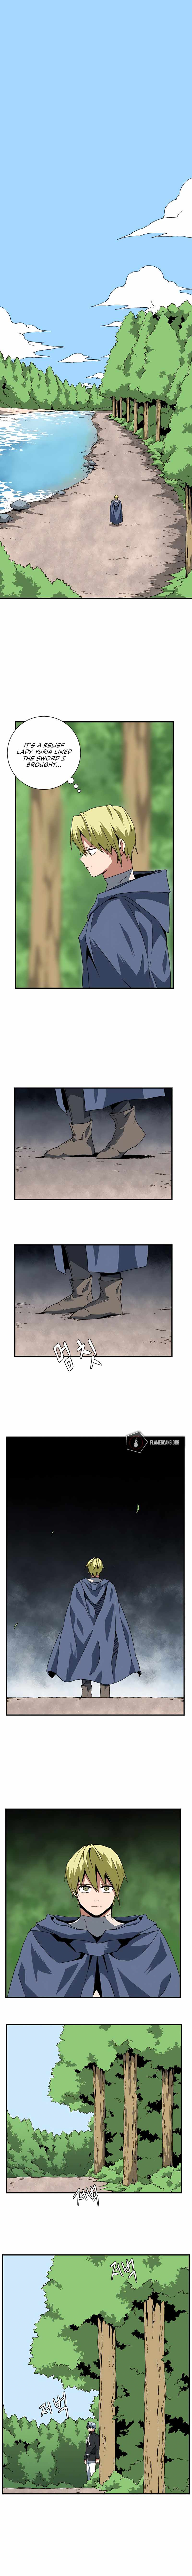 Even The Demon King, One Step At A Time - Page 3